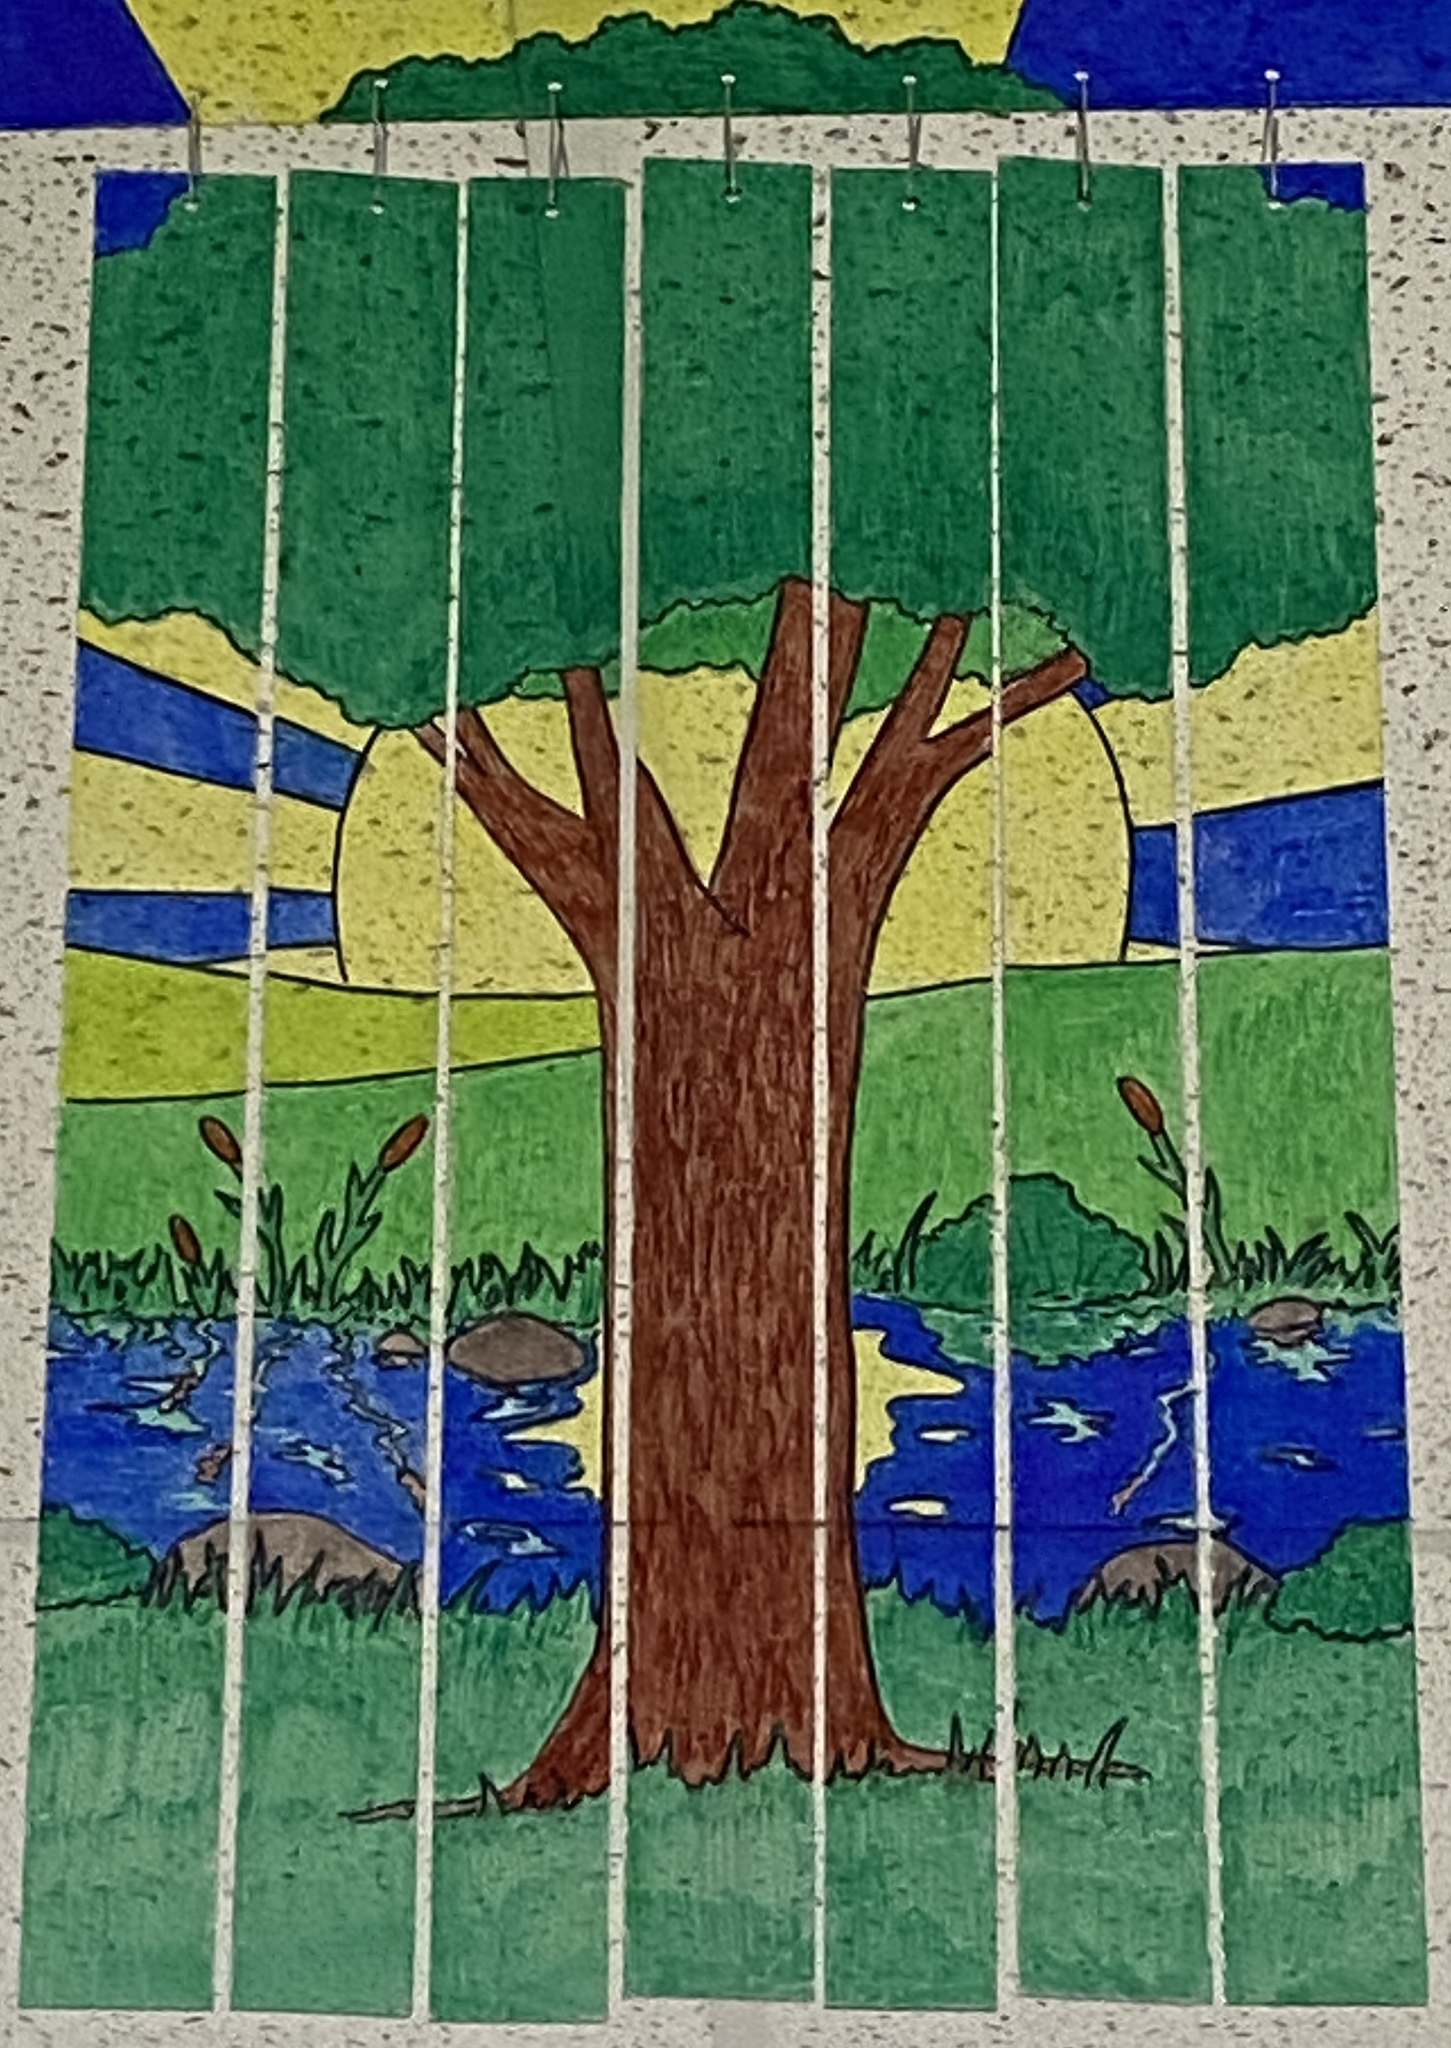 Clear strips of tile hung from ceiling, colored with outdoor scene including a tree and the sun